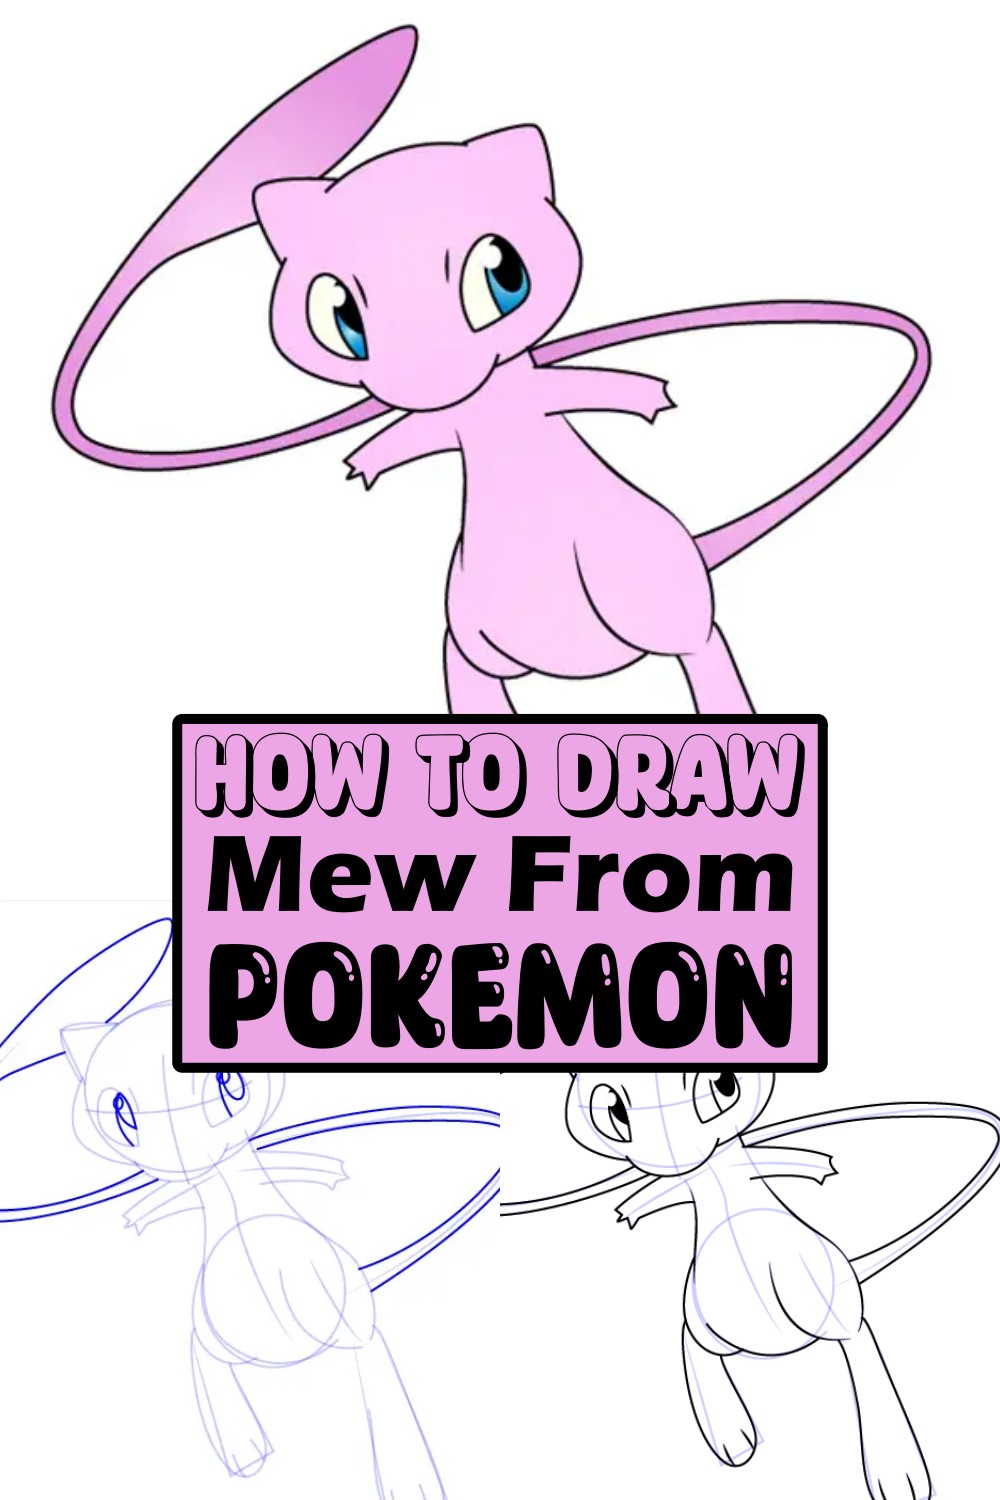 How To Draw Mew From Pokemon